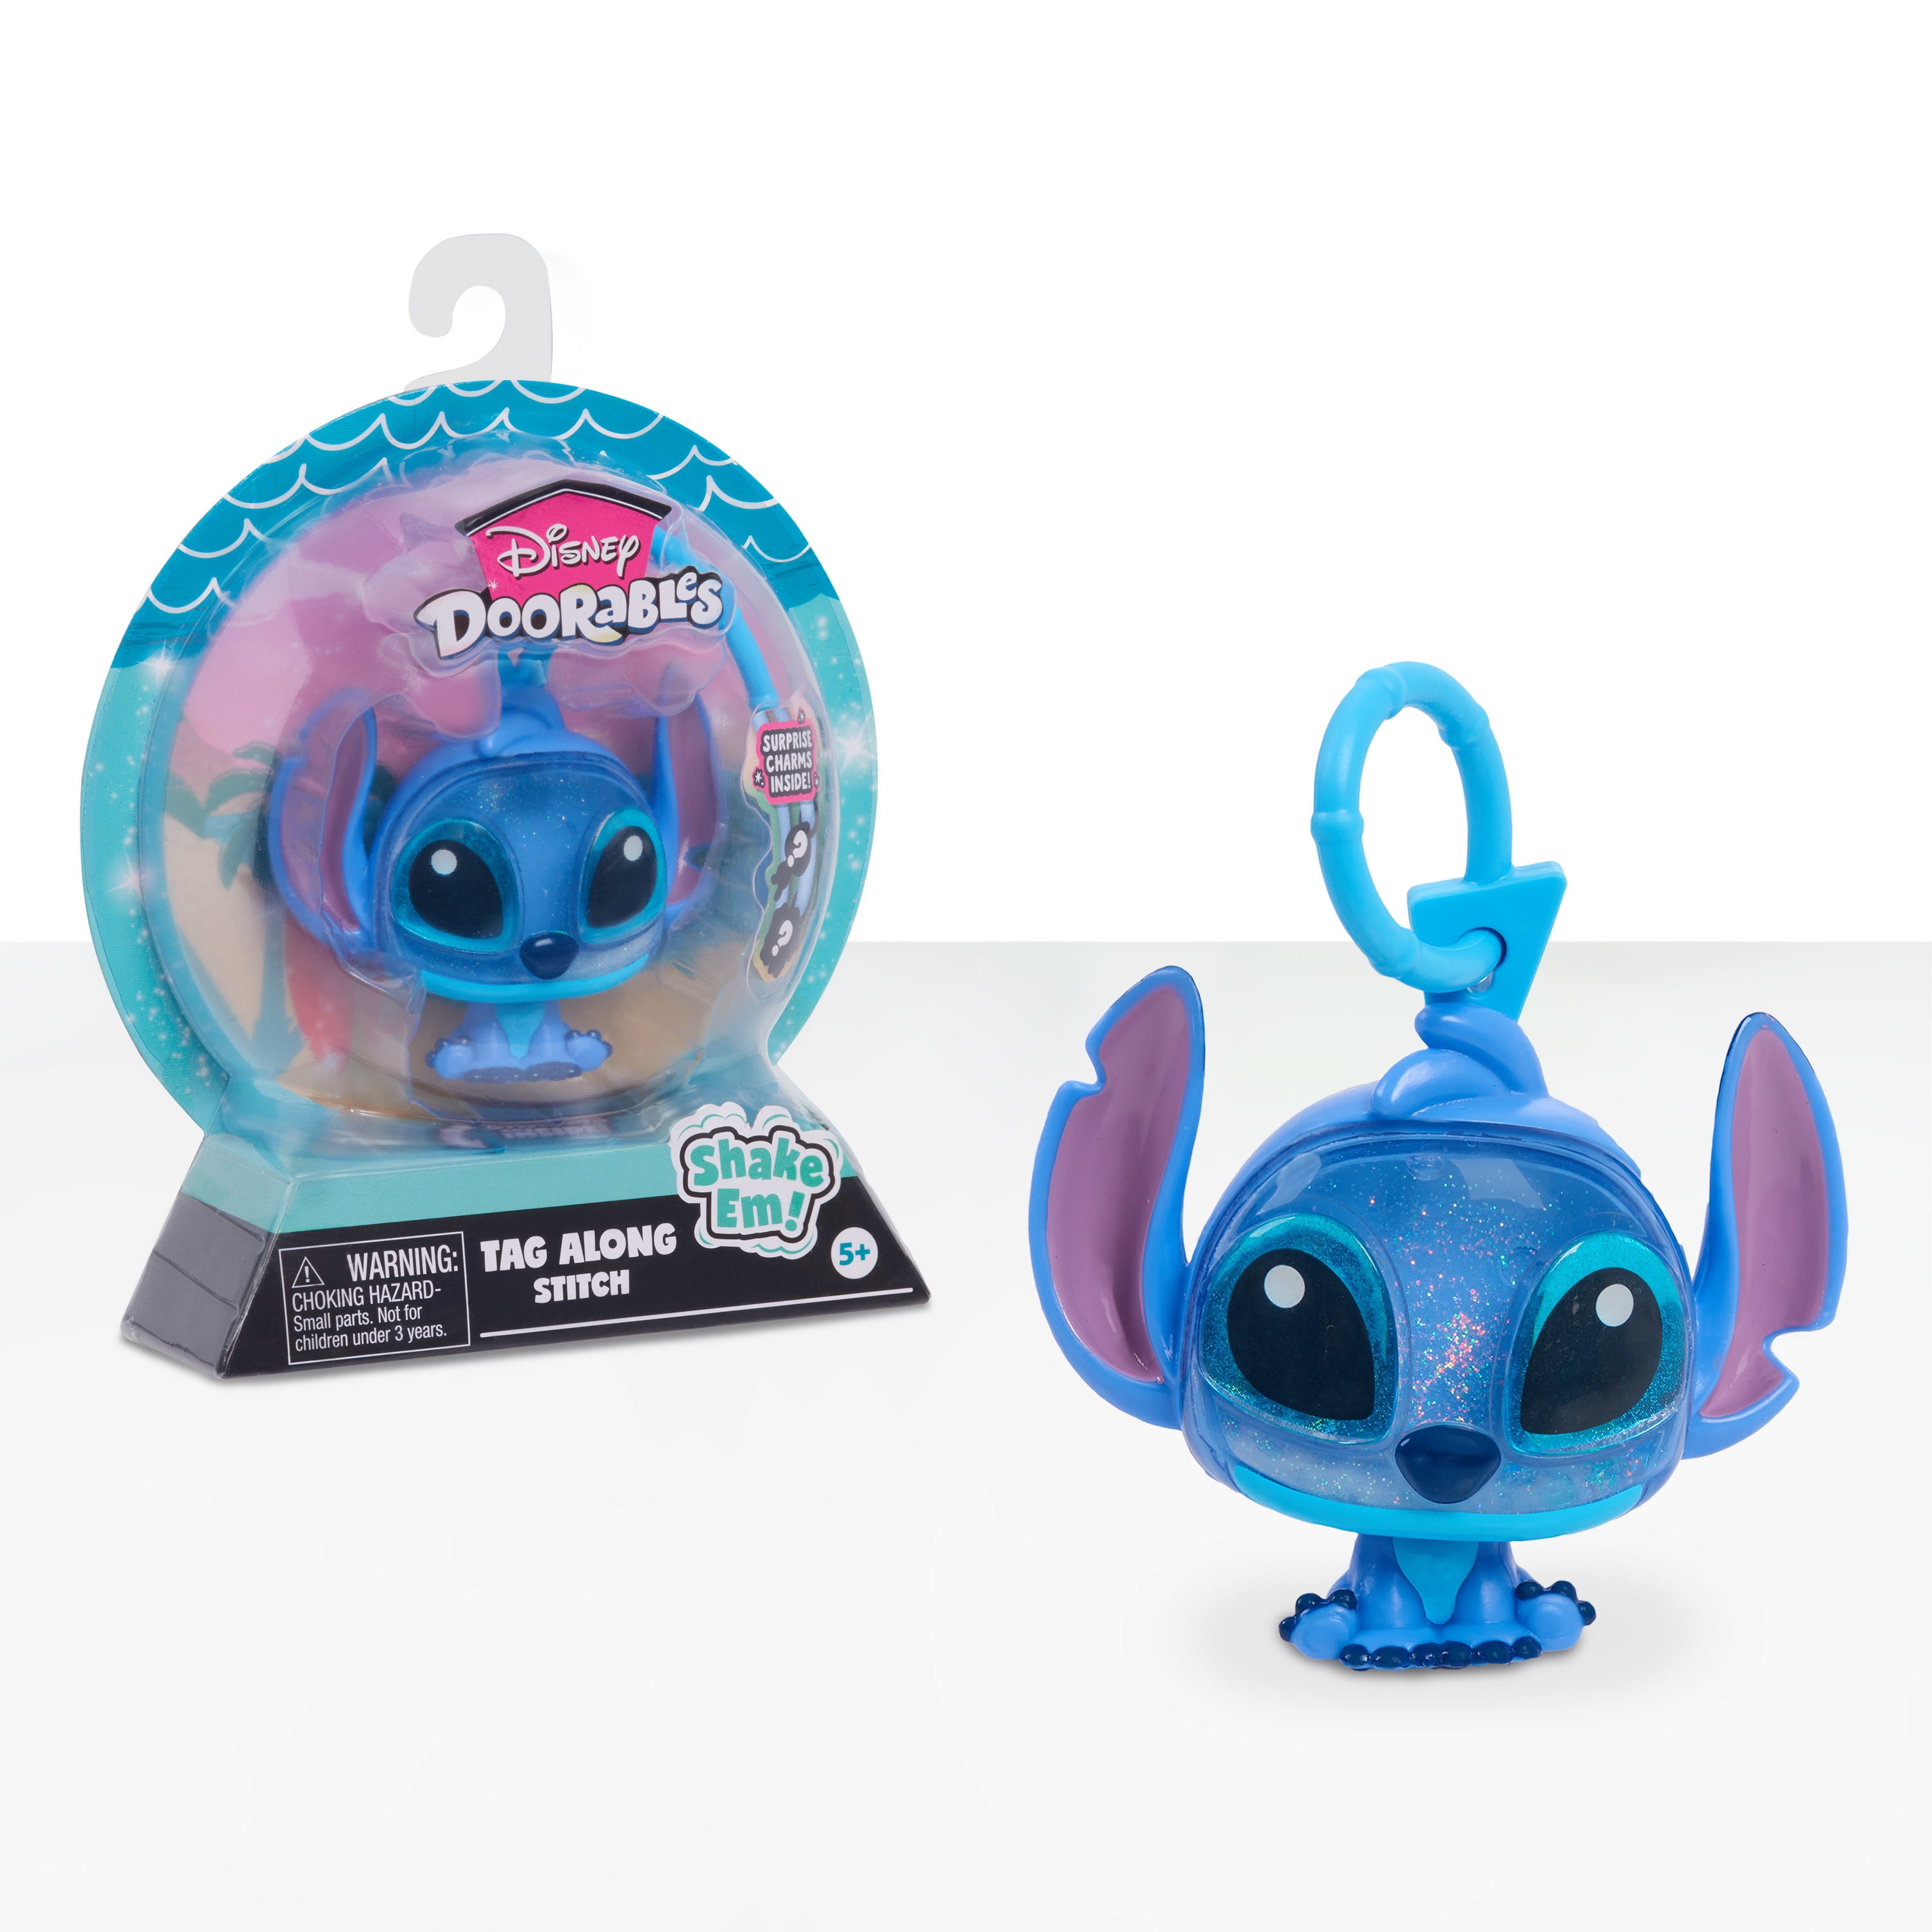 Disney Stitch Biggest Blind Bag, Officially Licensed Kids Toys for Ages 3  Up, Gifts and Presents 